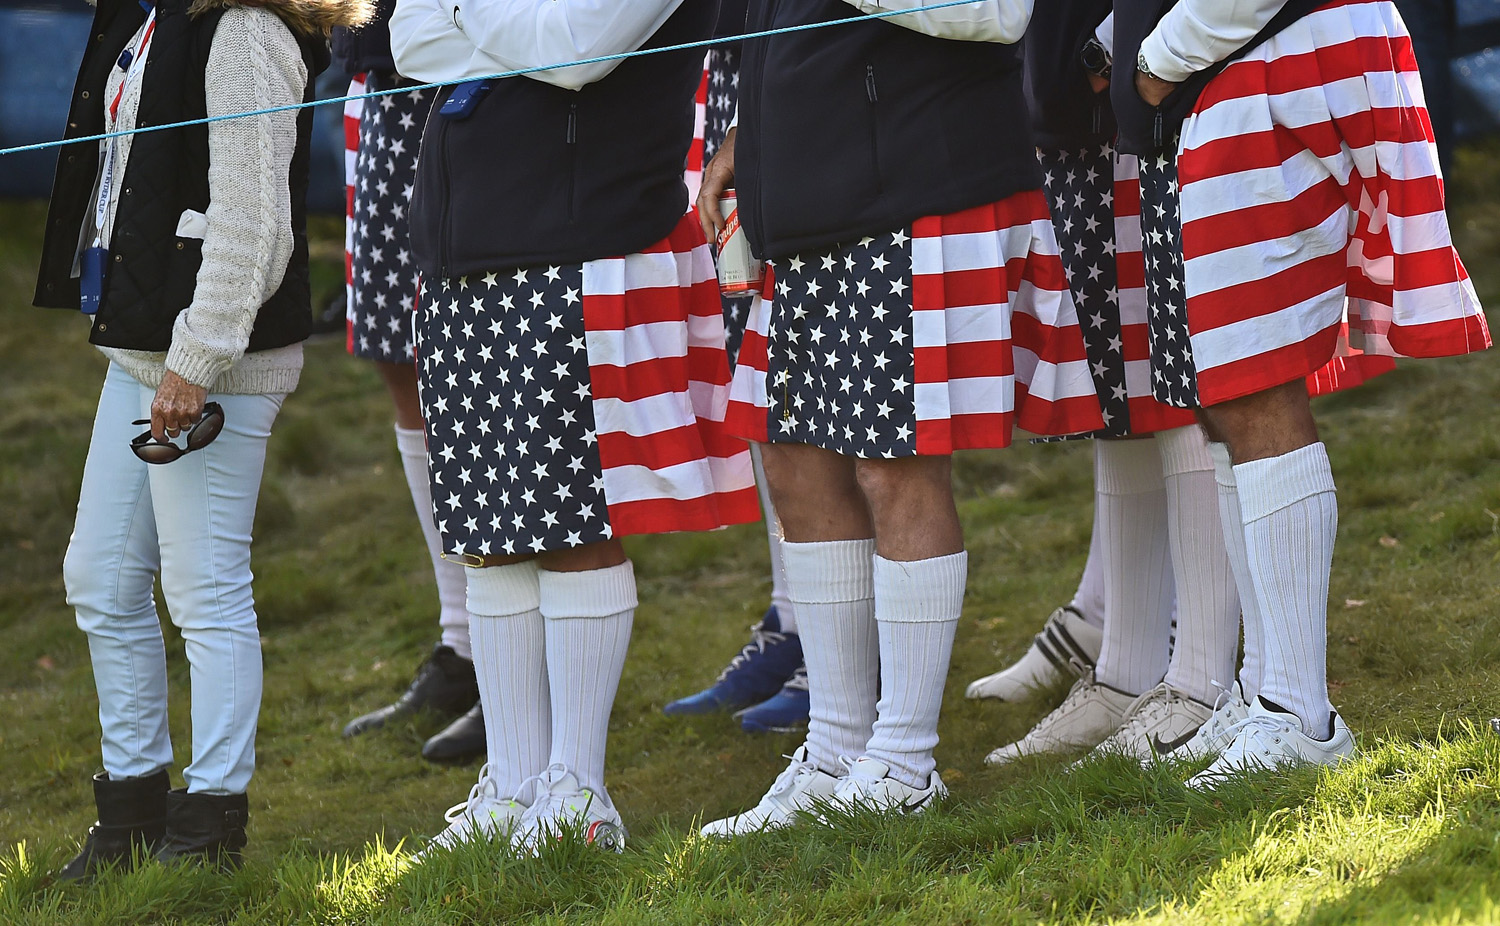 US fans wear patriotic clothing during the 2014 Ryder Cup competition between Europe and the USA, as they watch the foursomes golf matches at Gleneagles in Scotland, on Sept. 26, 2014.